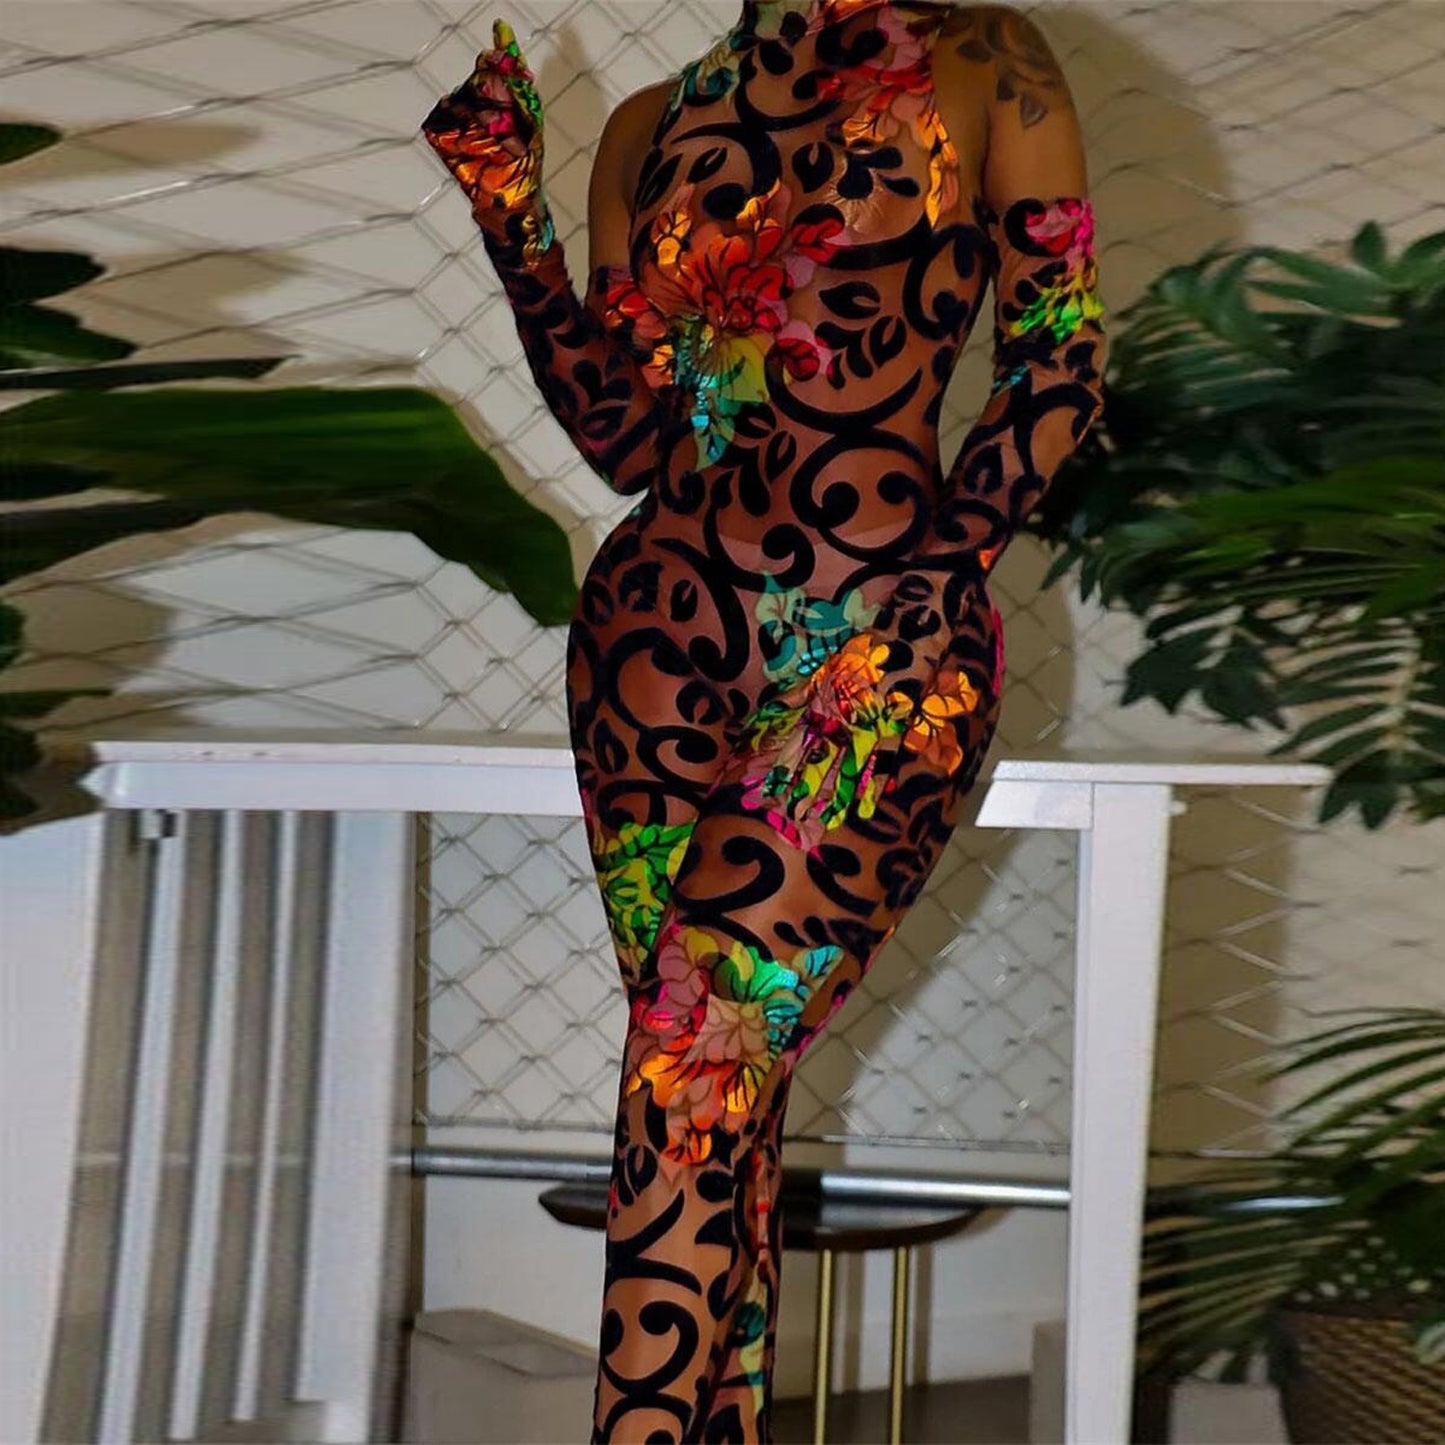 Floral Bodycon Jumpsuit with Gloves